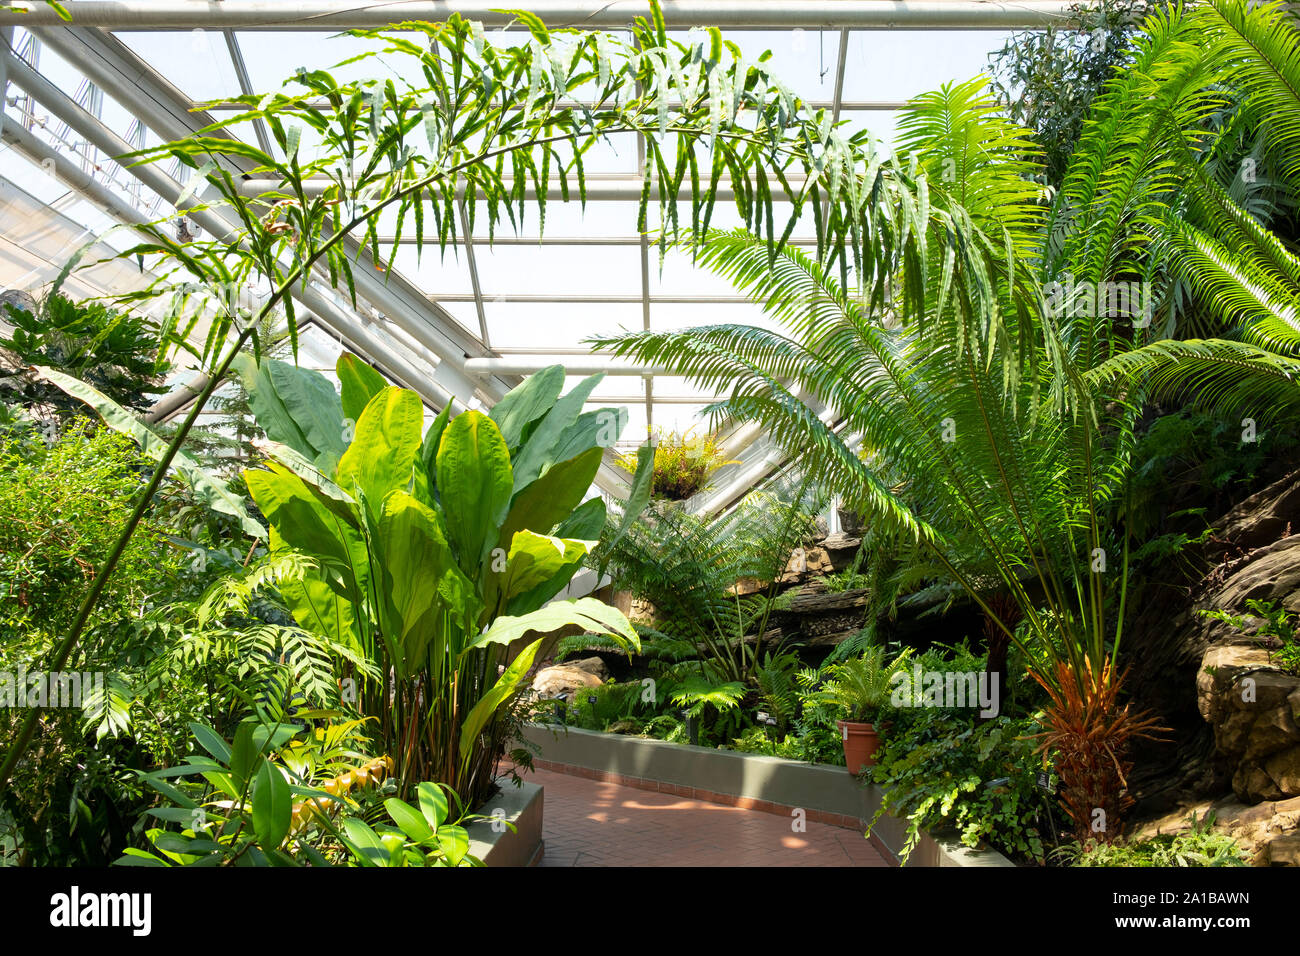 Tropical plants inside the conservatory at the Brooklyn Botanical Garden, Brooklyn, New York City, New York State, U.S.A. Stock Photo